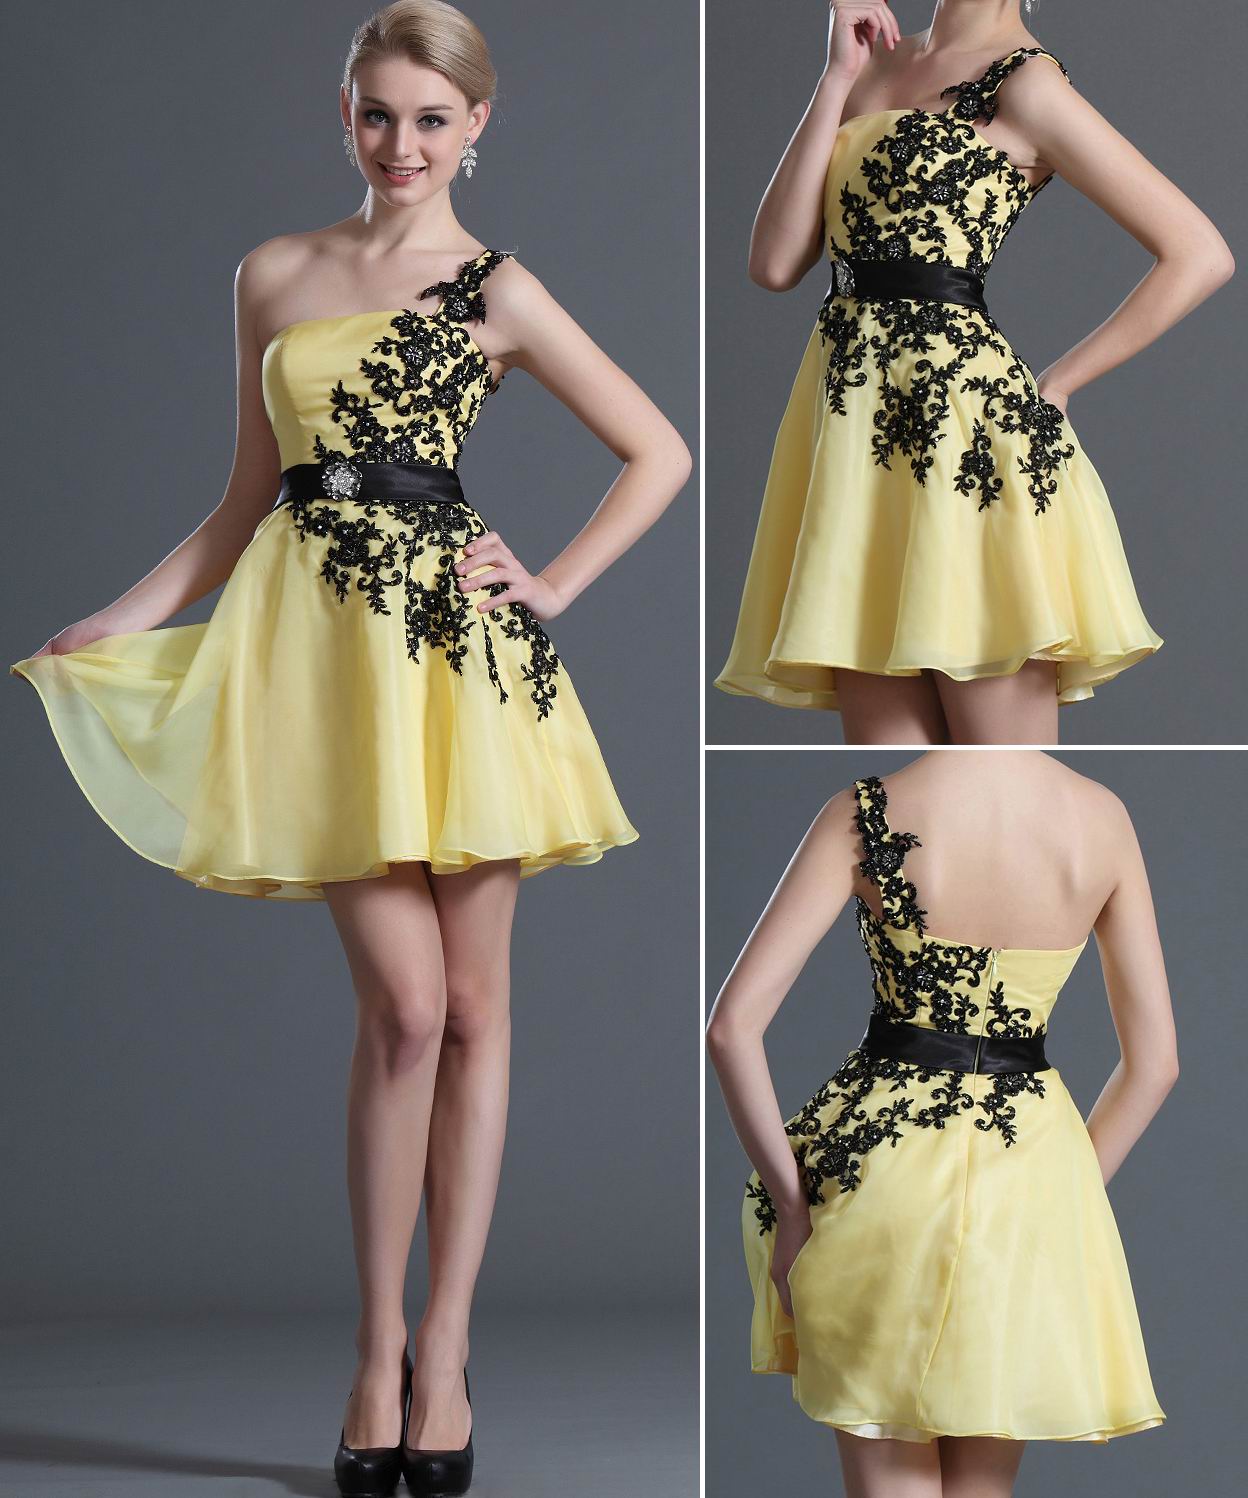 A-Line Yellow Chiffon One Shoulder Short/Mini With Appliques Bridesmaid Dress(UKBD03-411)